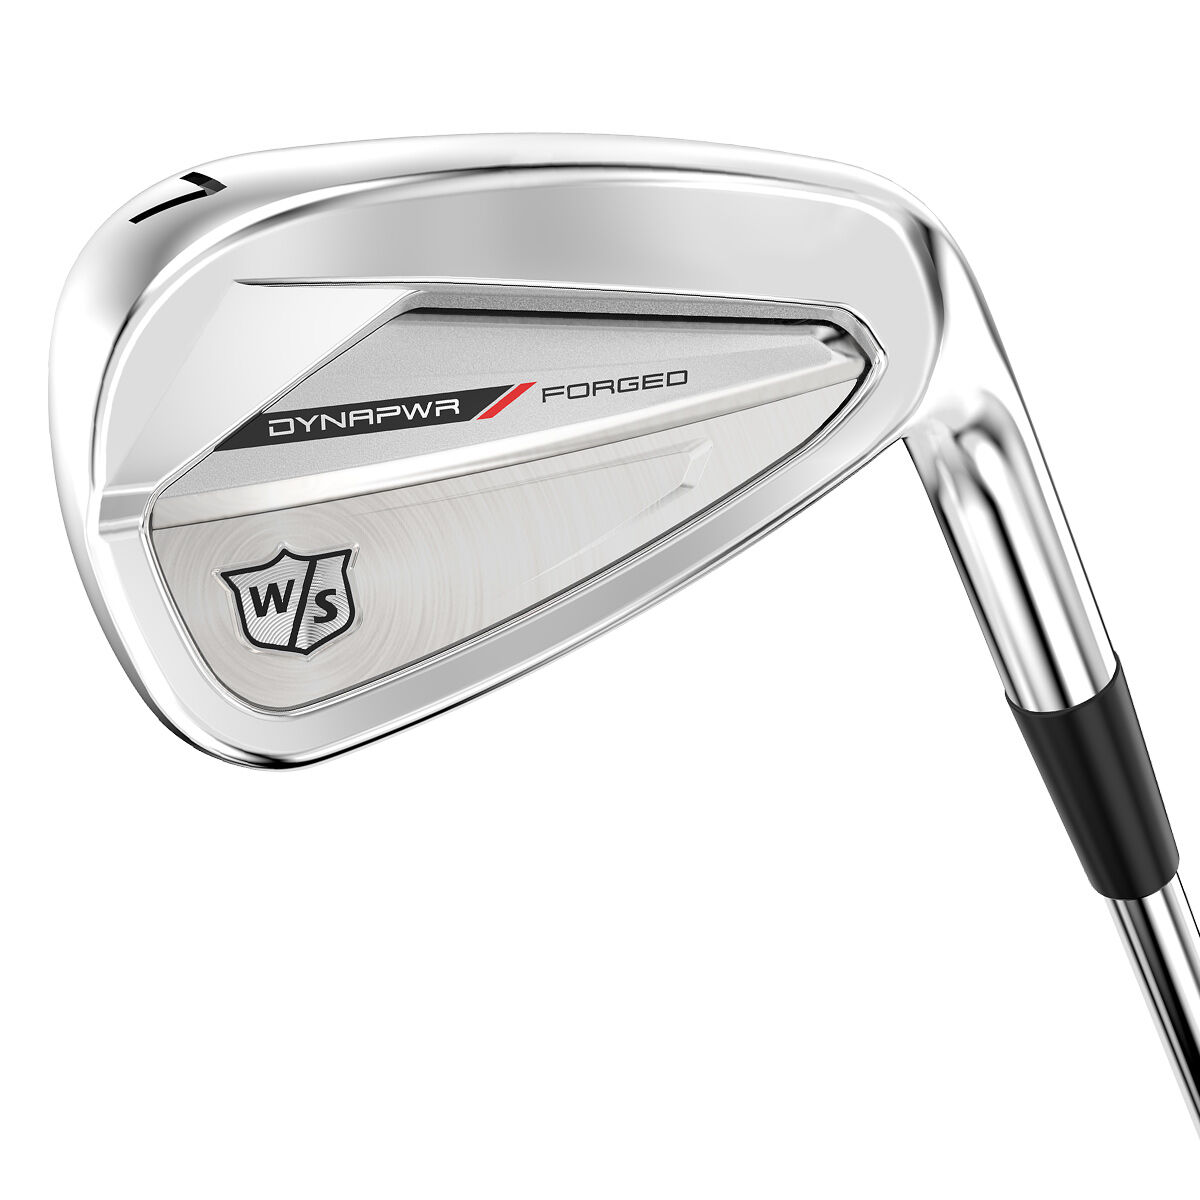 Wilson Staff Wilson Dynapower Forged Graphite Golf Irons, Mens, 5-pw (6 irons), Right hand, Graphite, Regular | American Golf